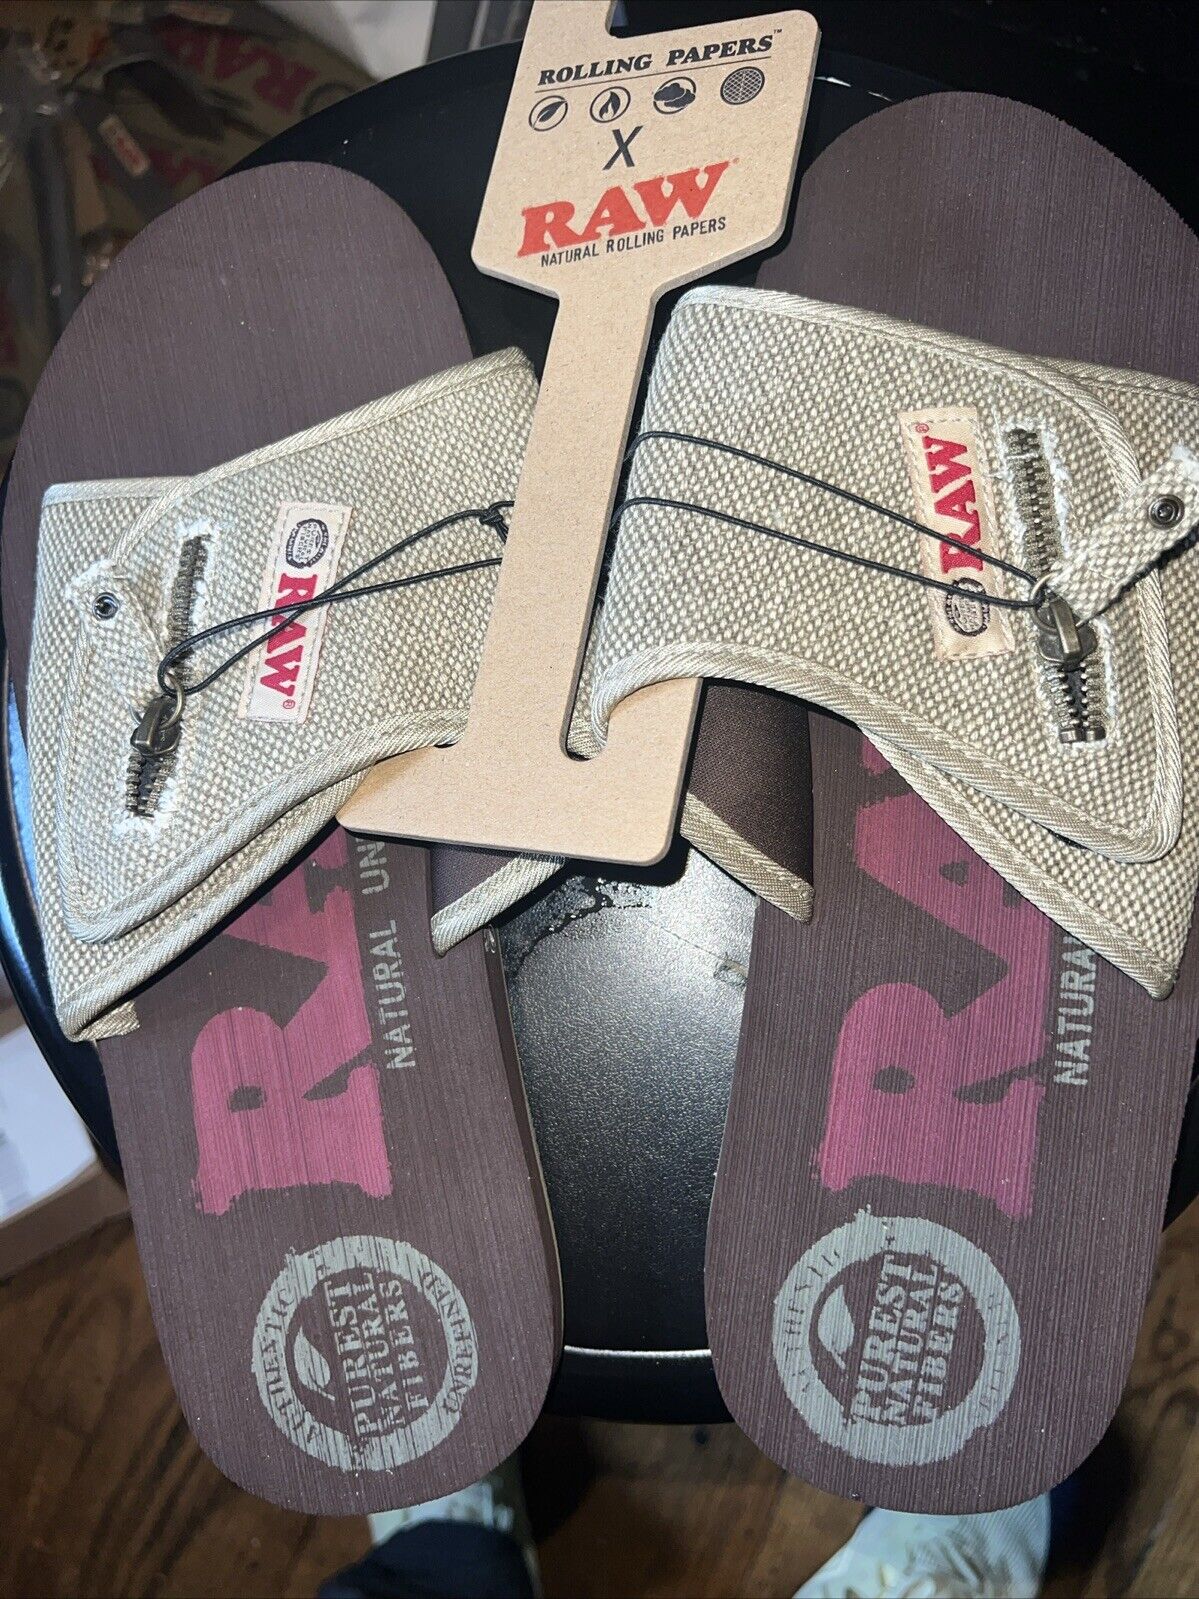 BNWT Raw Rolling papers slides Size 12